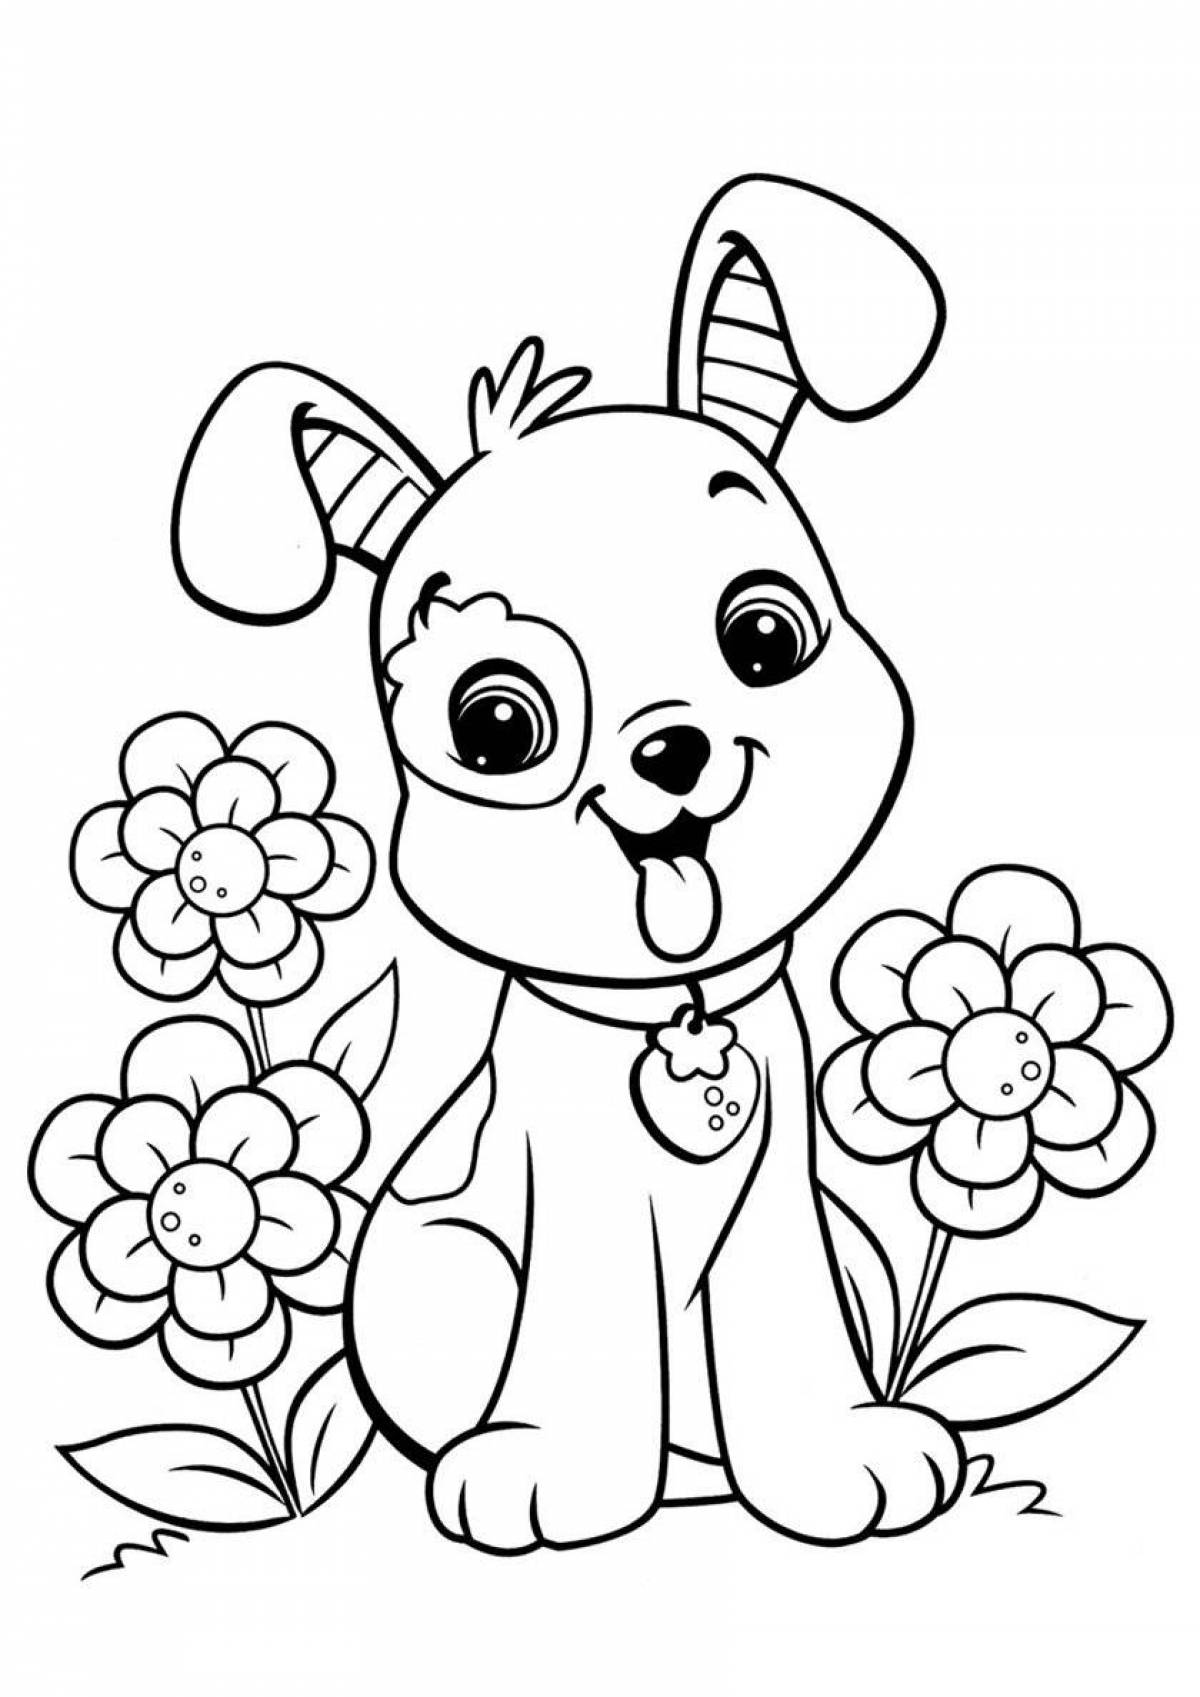 Coloring page cute dog